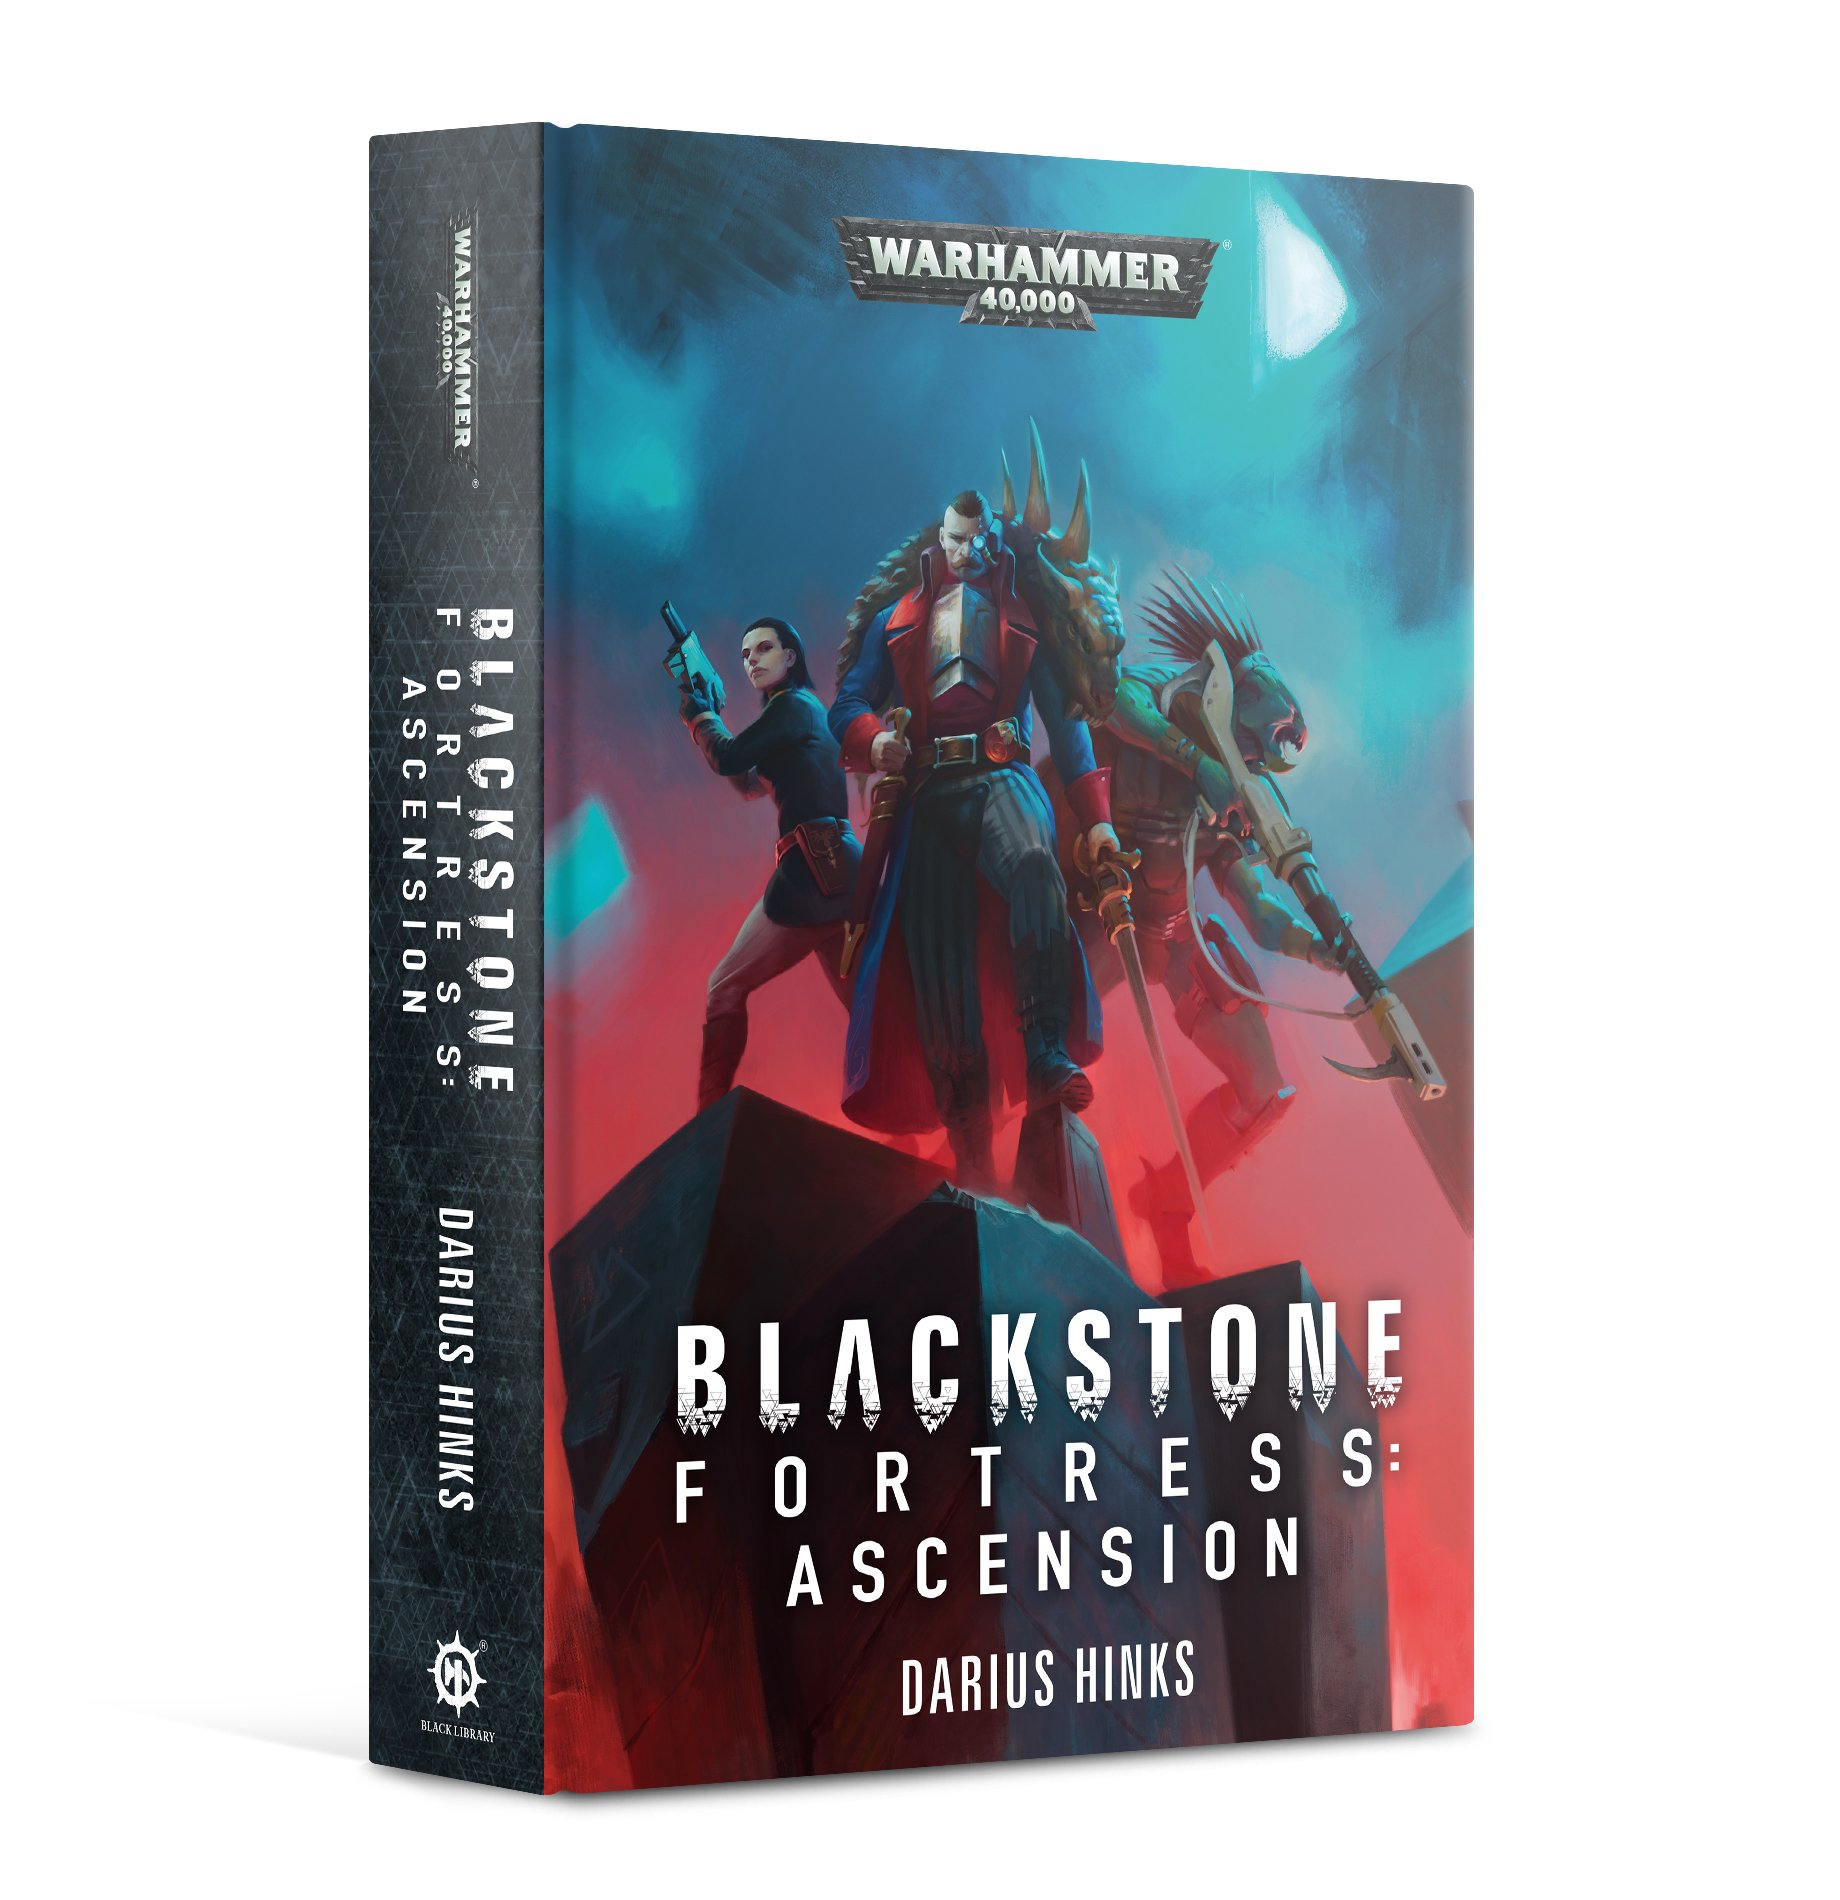 Black Library: Warhammer Quest: Blackstone Fortress - Ascension (HB) 